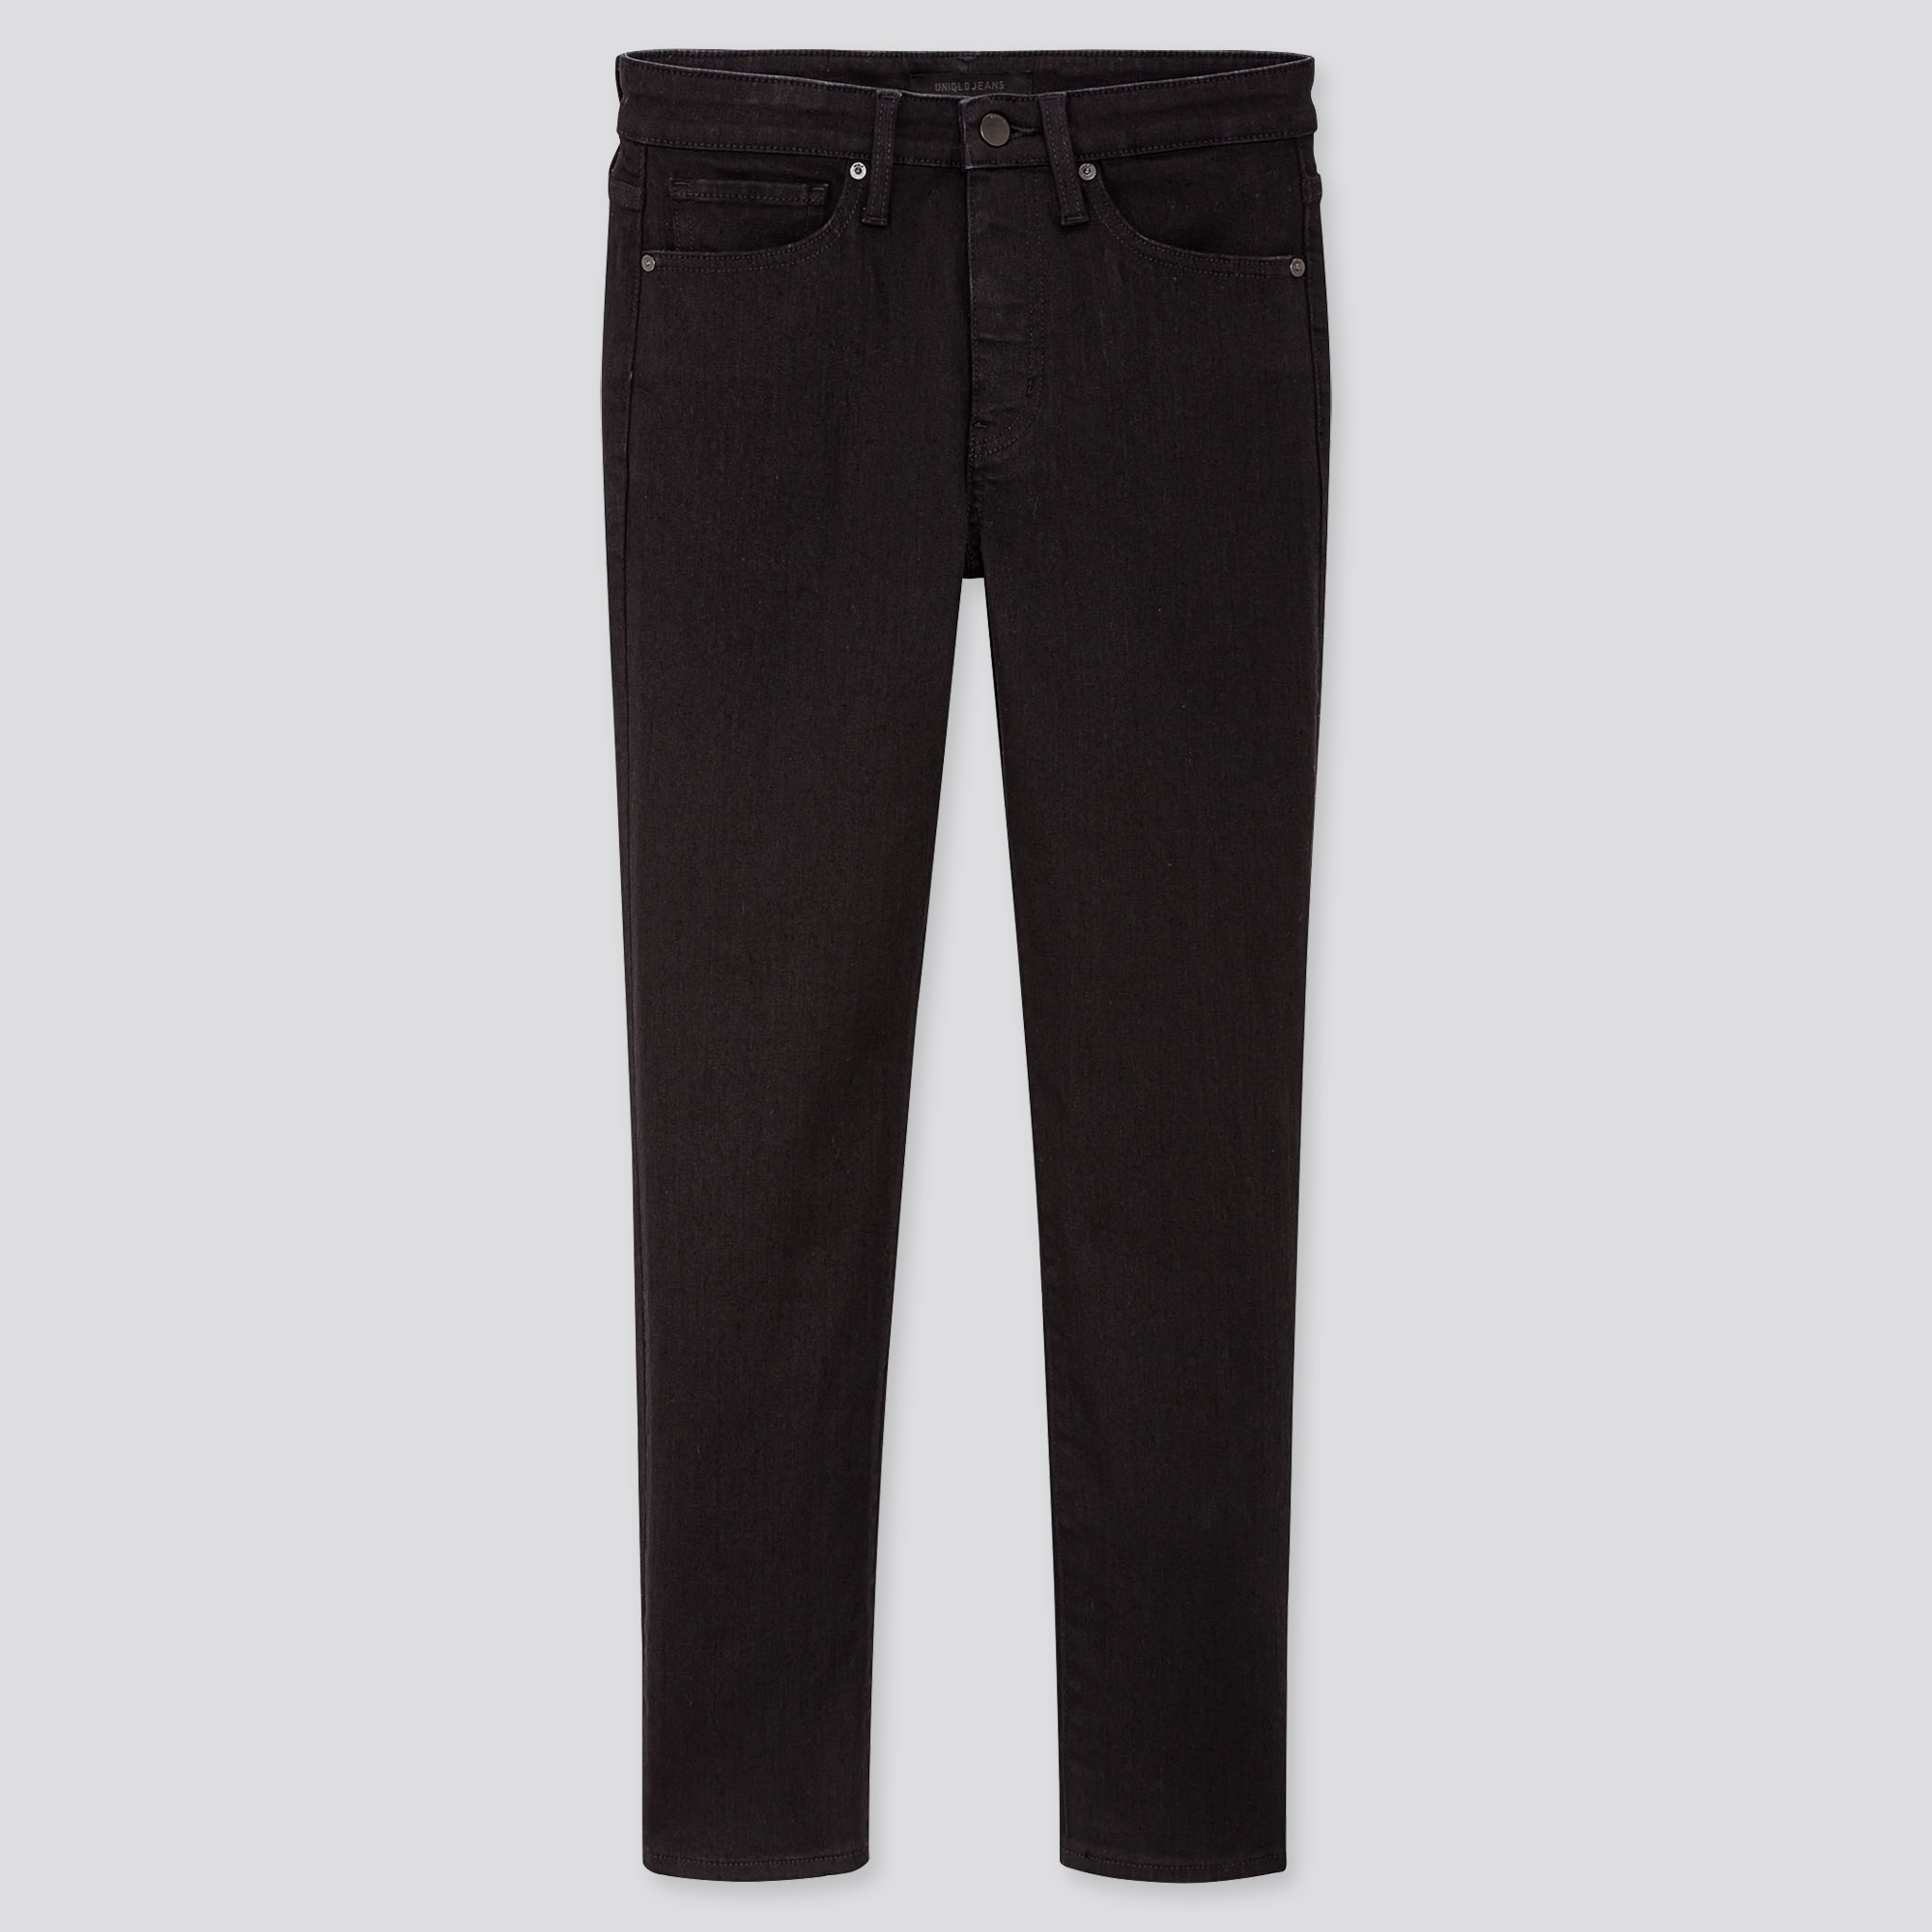 slim fit ankle length jeans